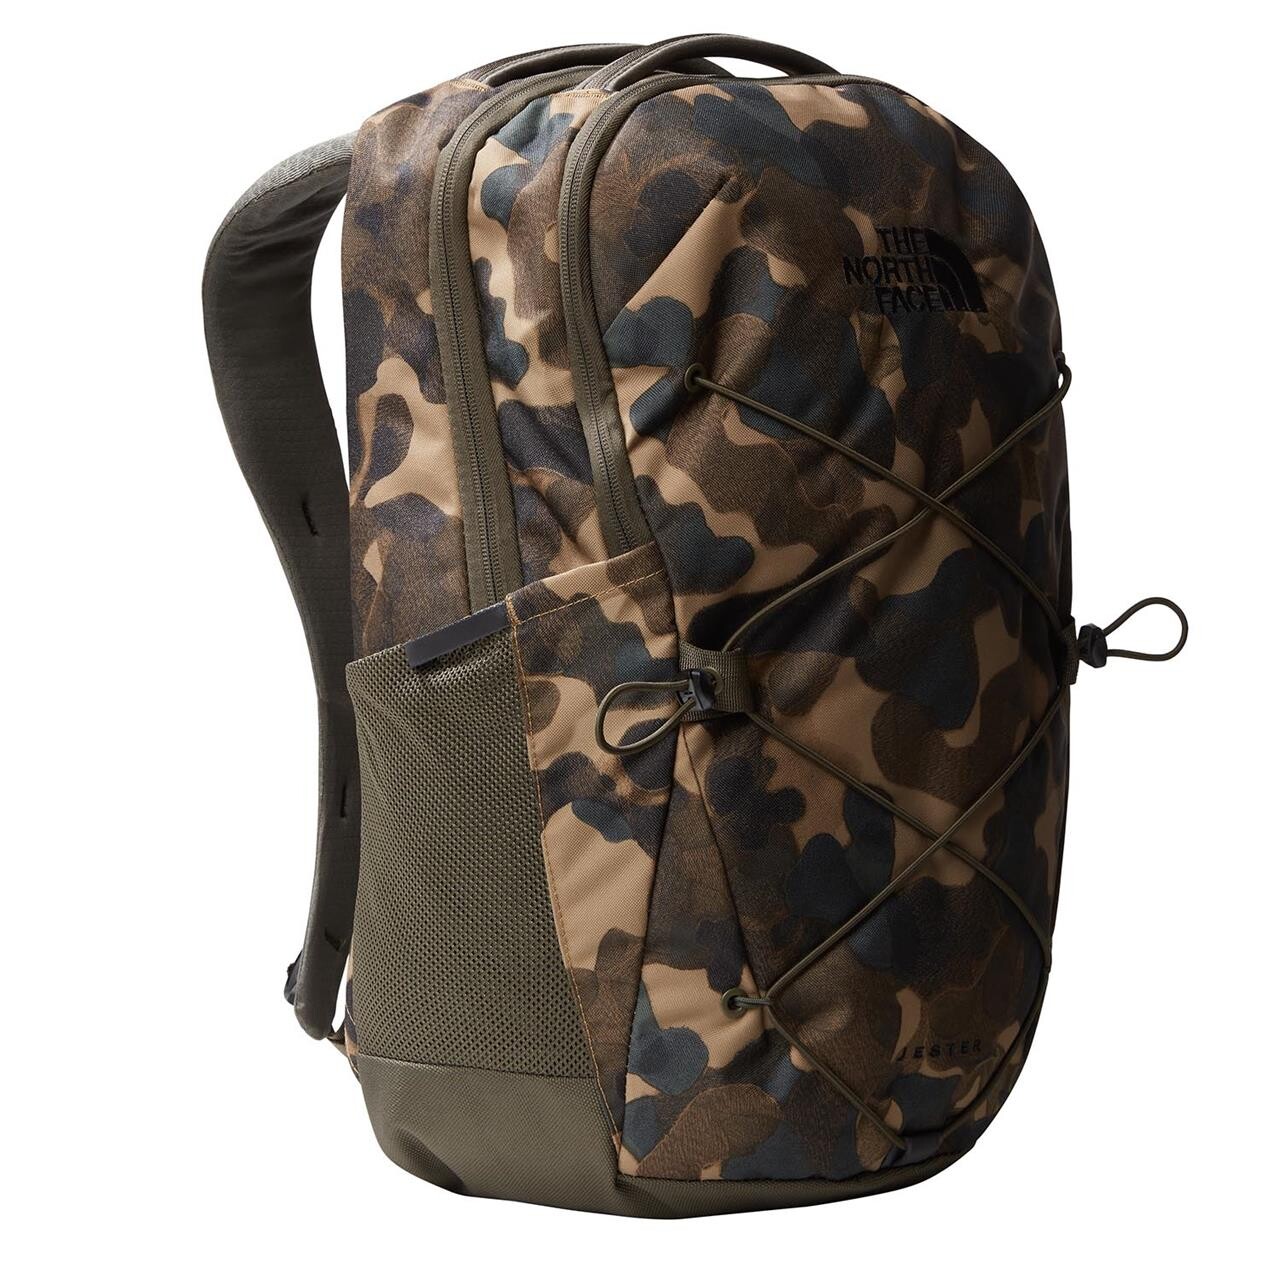 10: The North Face Jester (Brun (UTILITY BROWN CAMO TEXT) ONE SIZE)